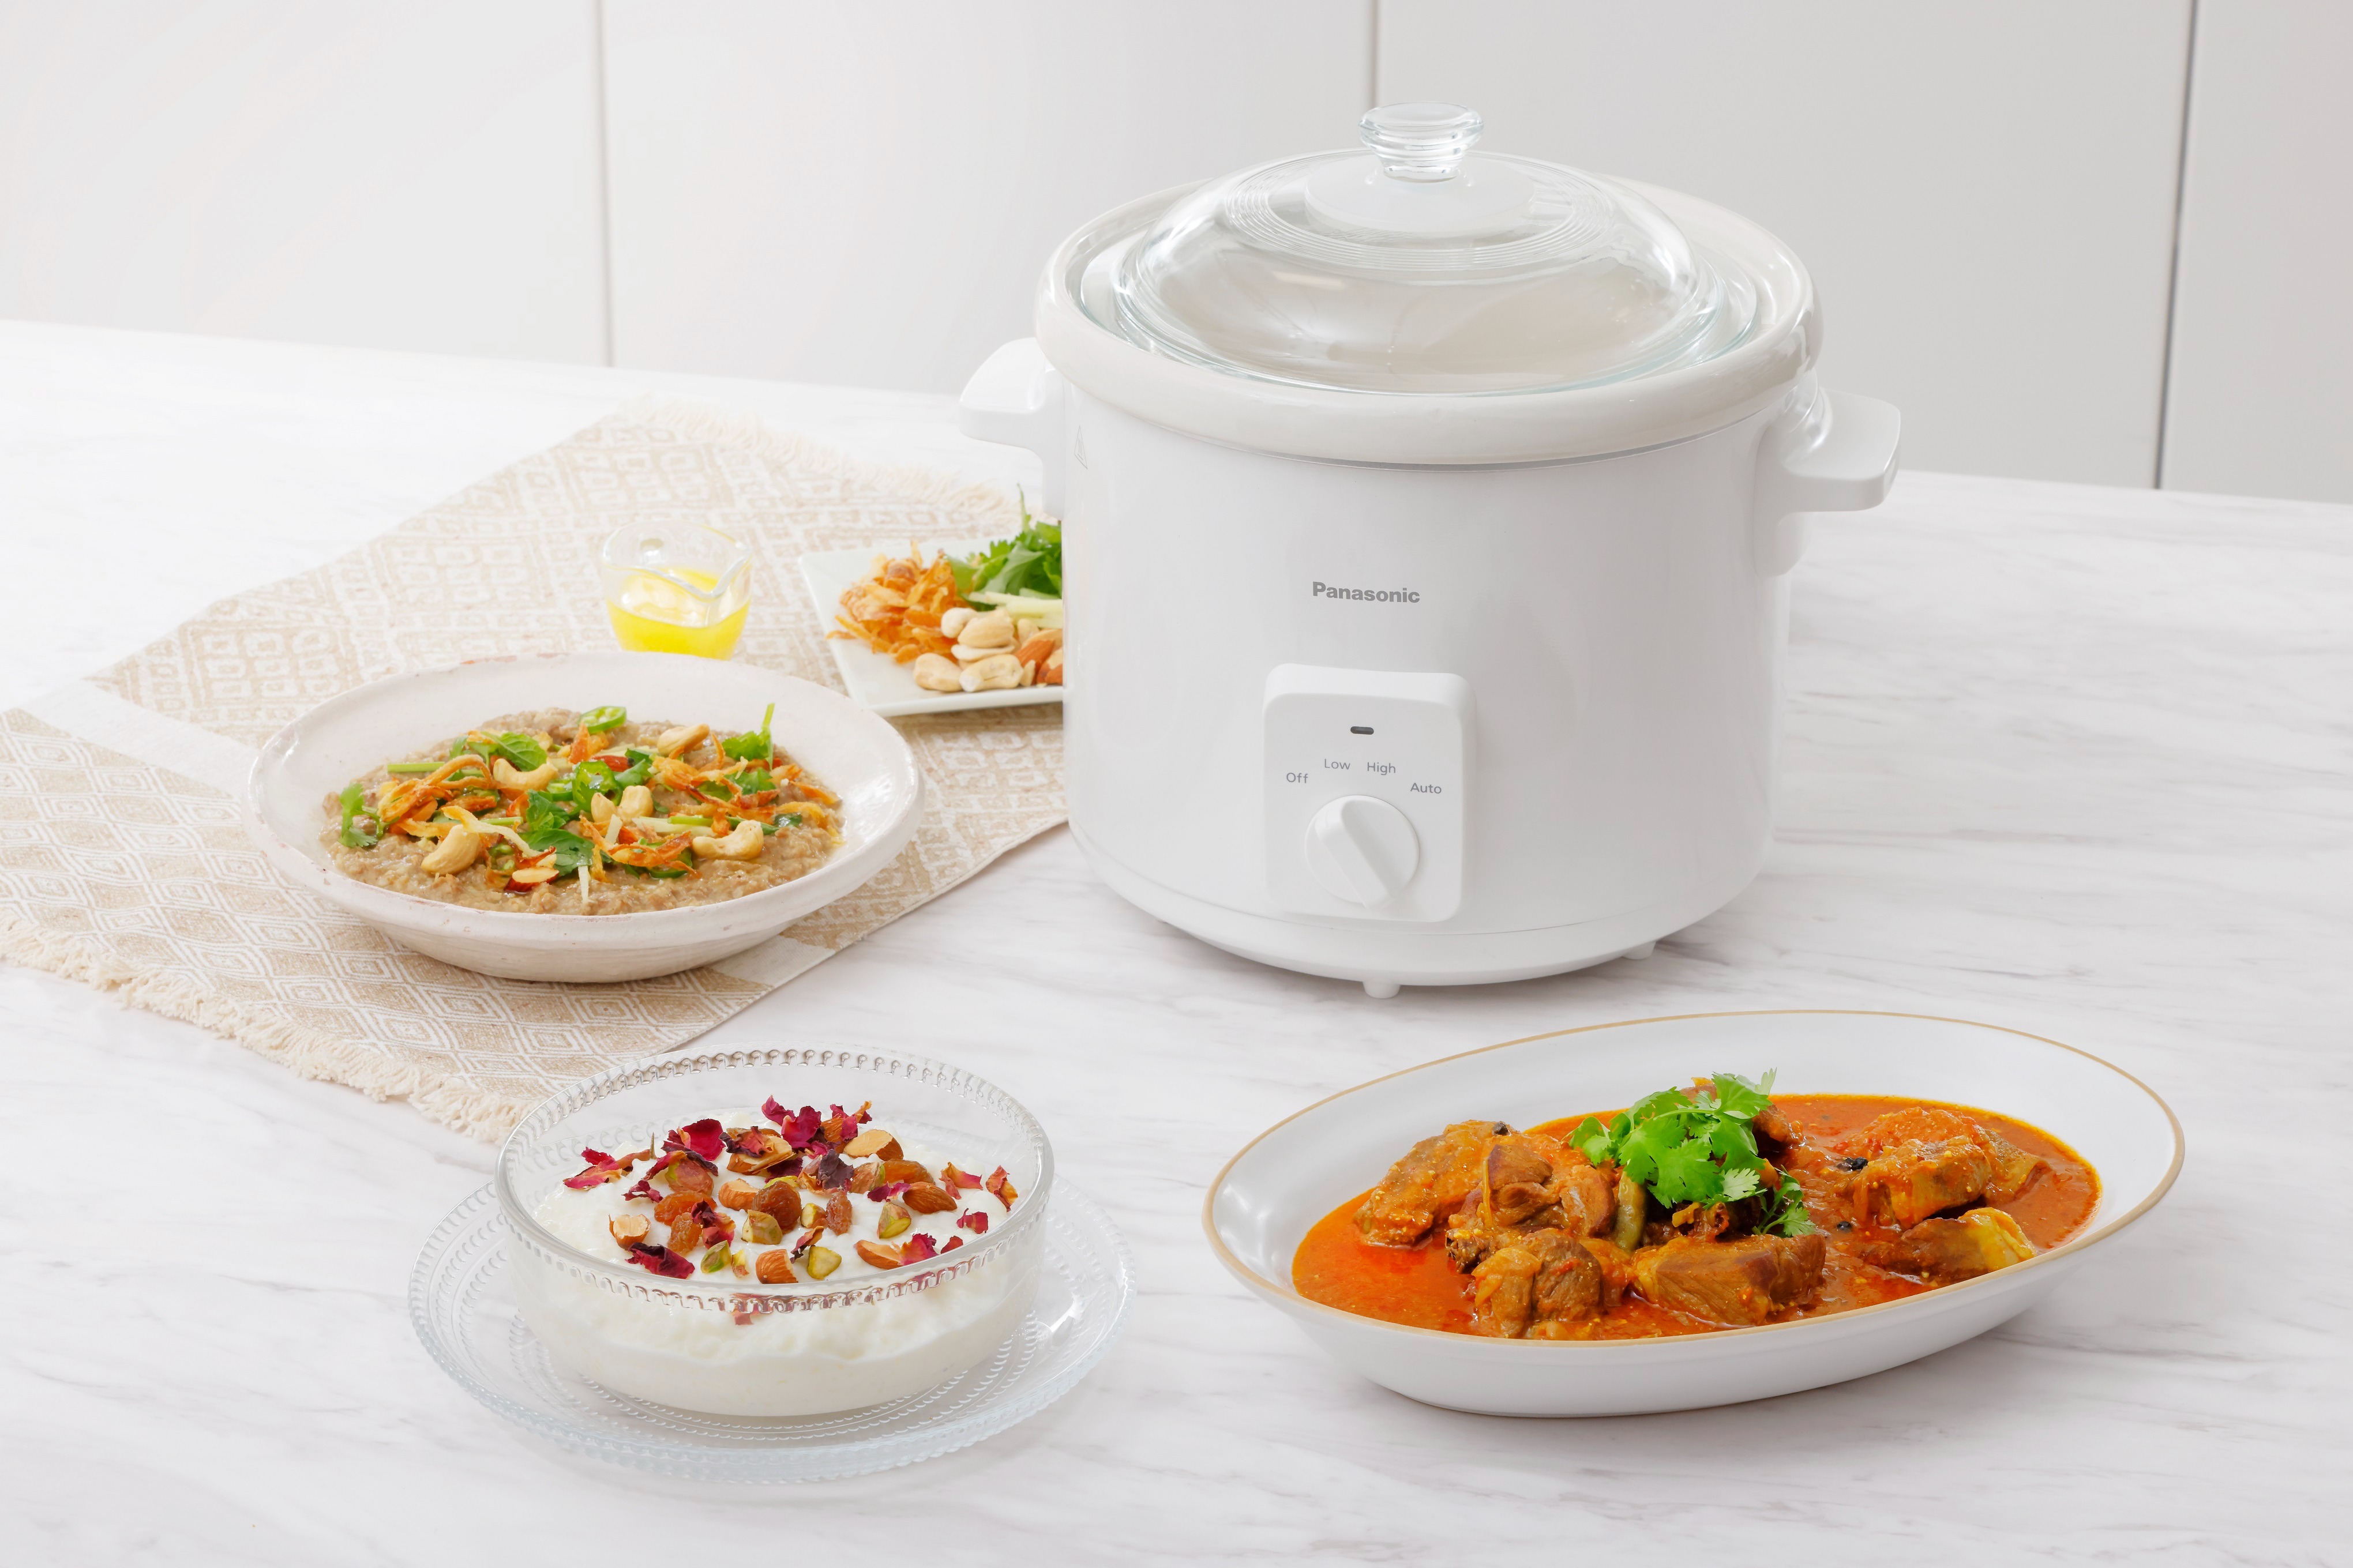 Healthy cooking is easier than ever as Panasonic introduces new slow ...